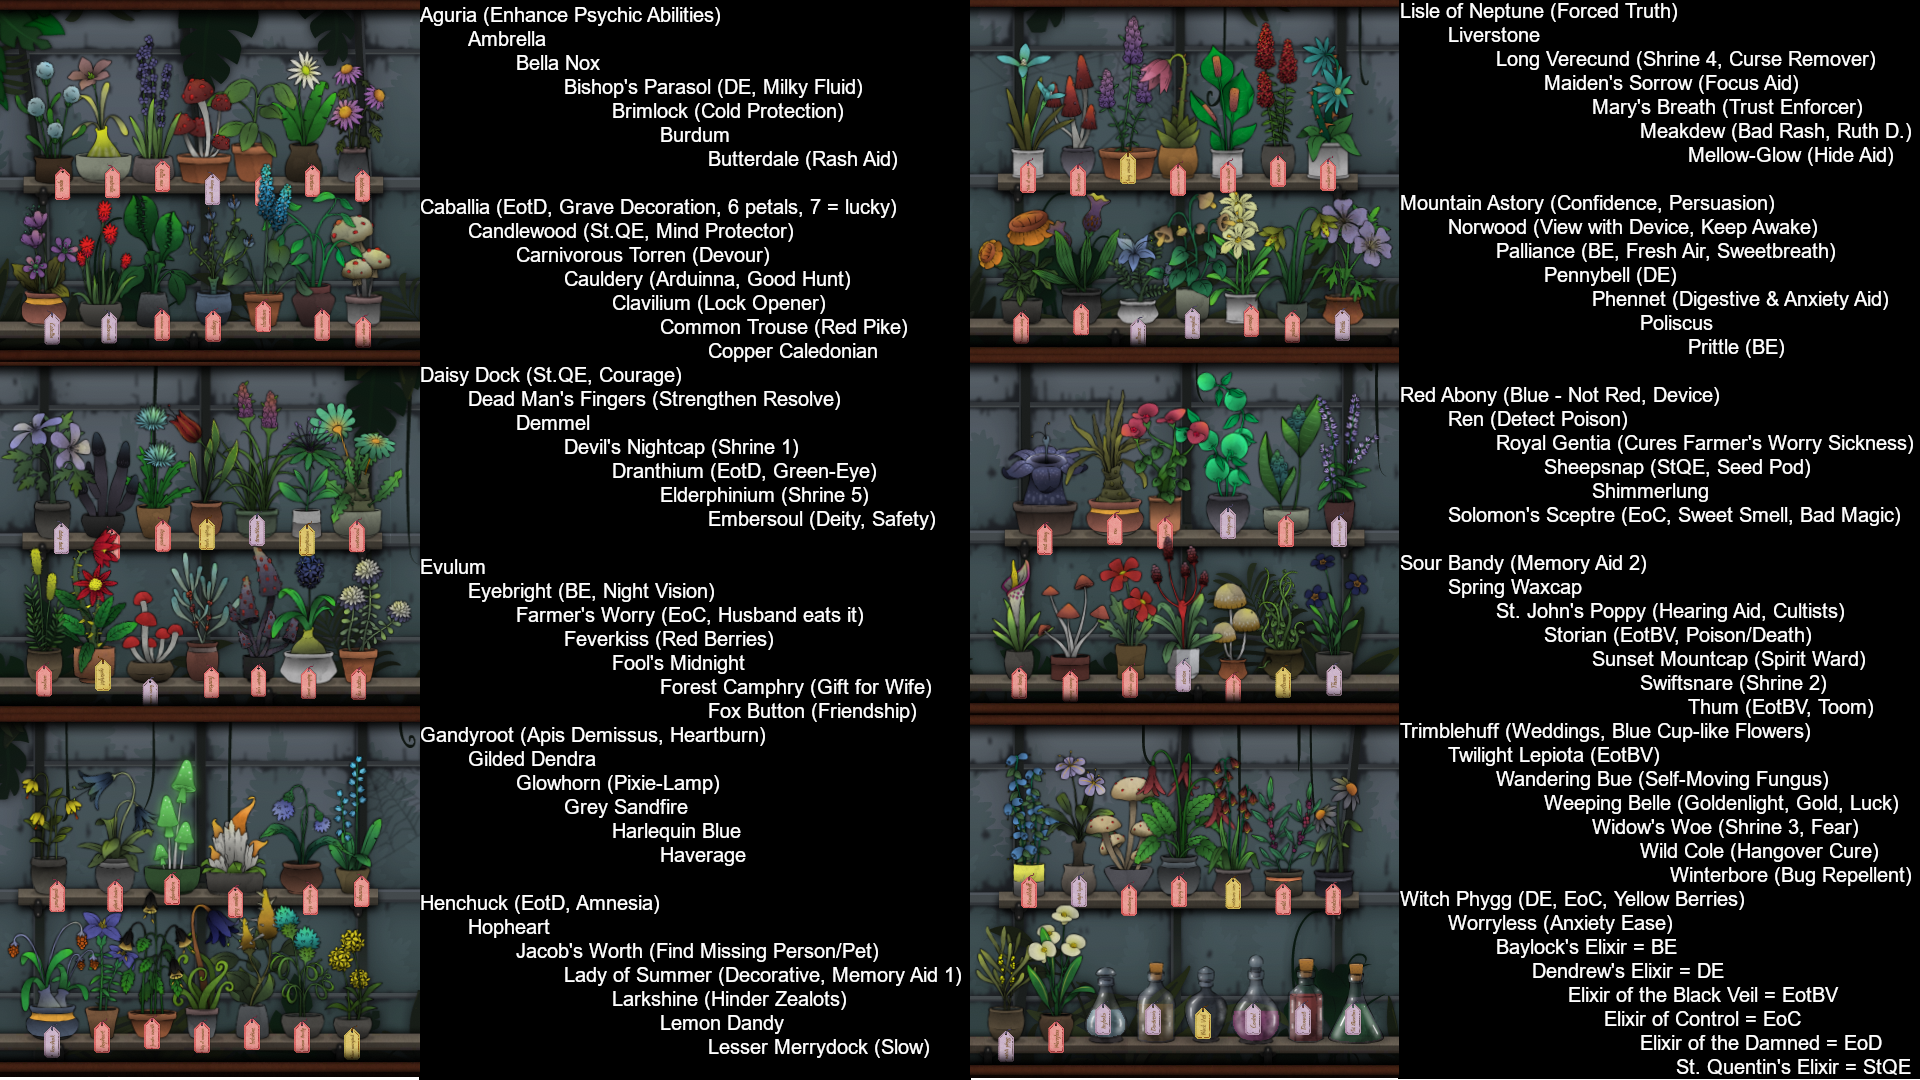 Single Image Guide to all Plants and Elixirs image 1